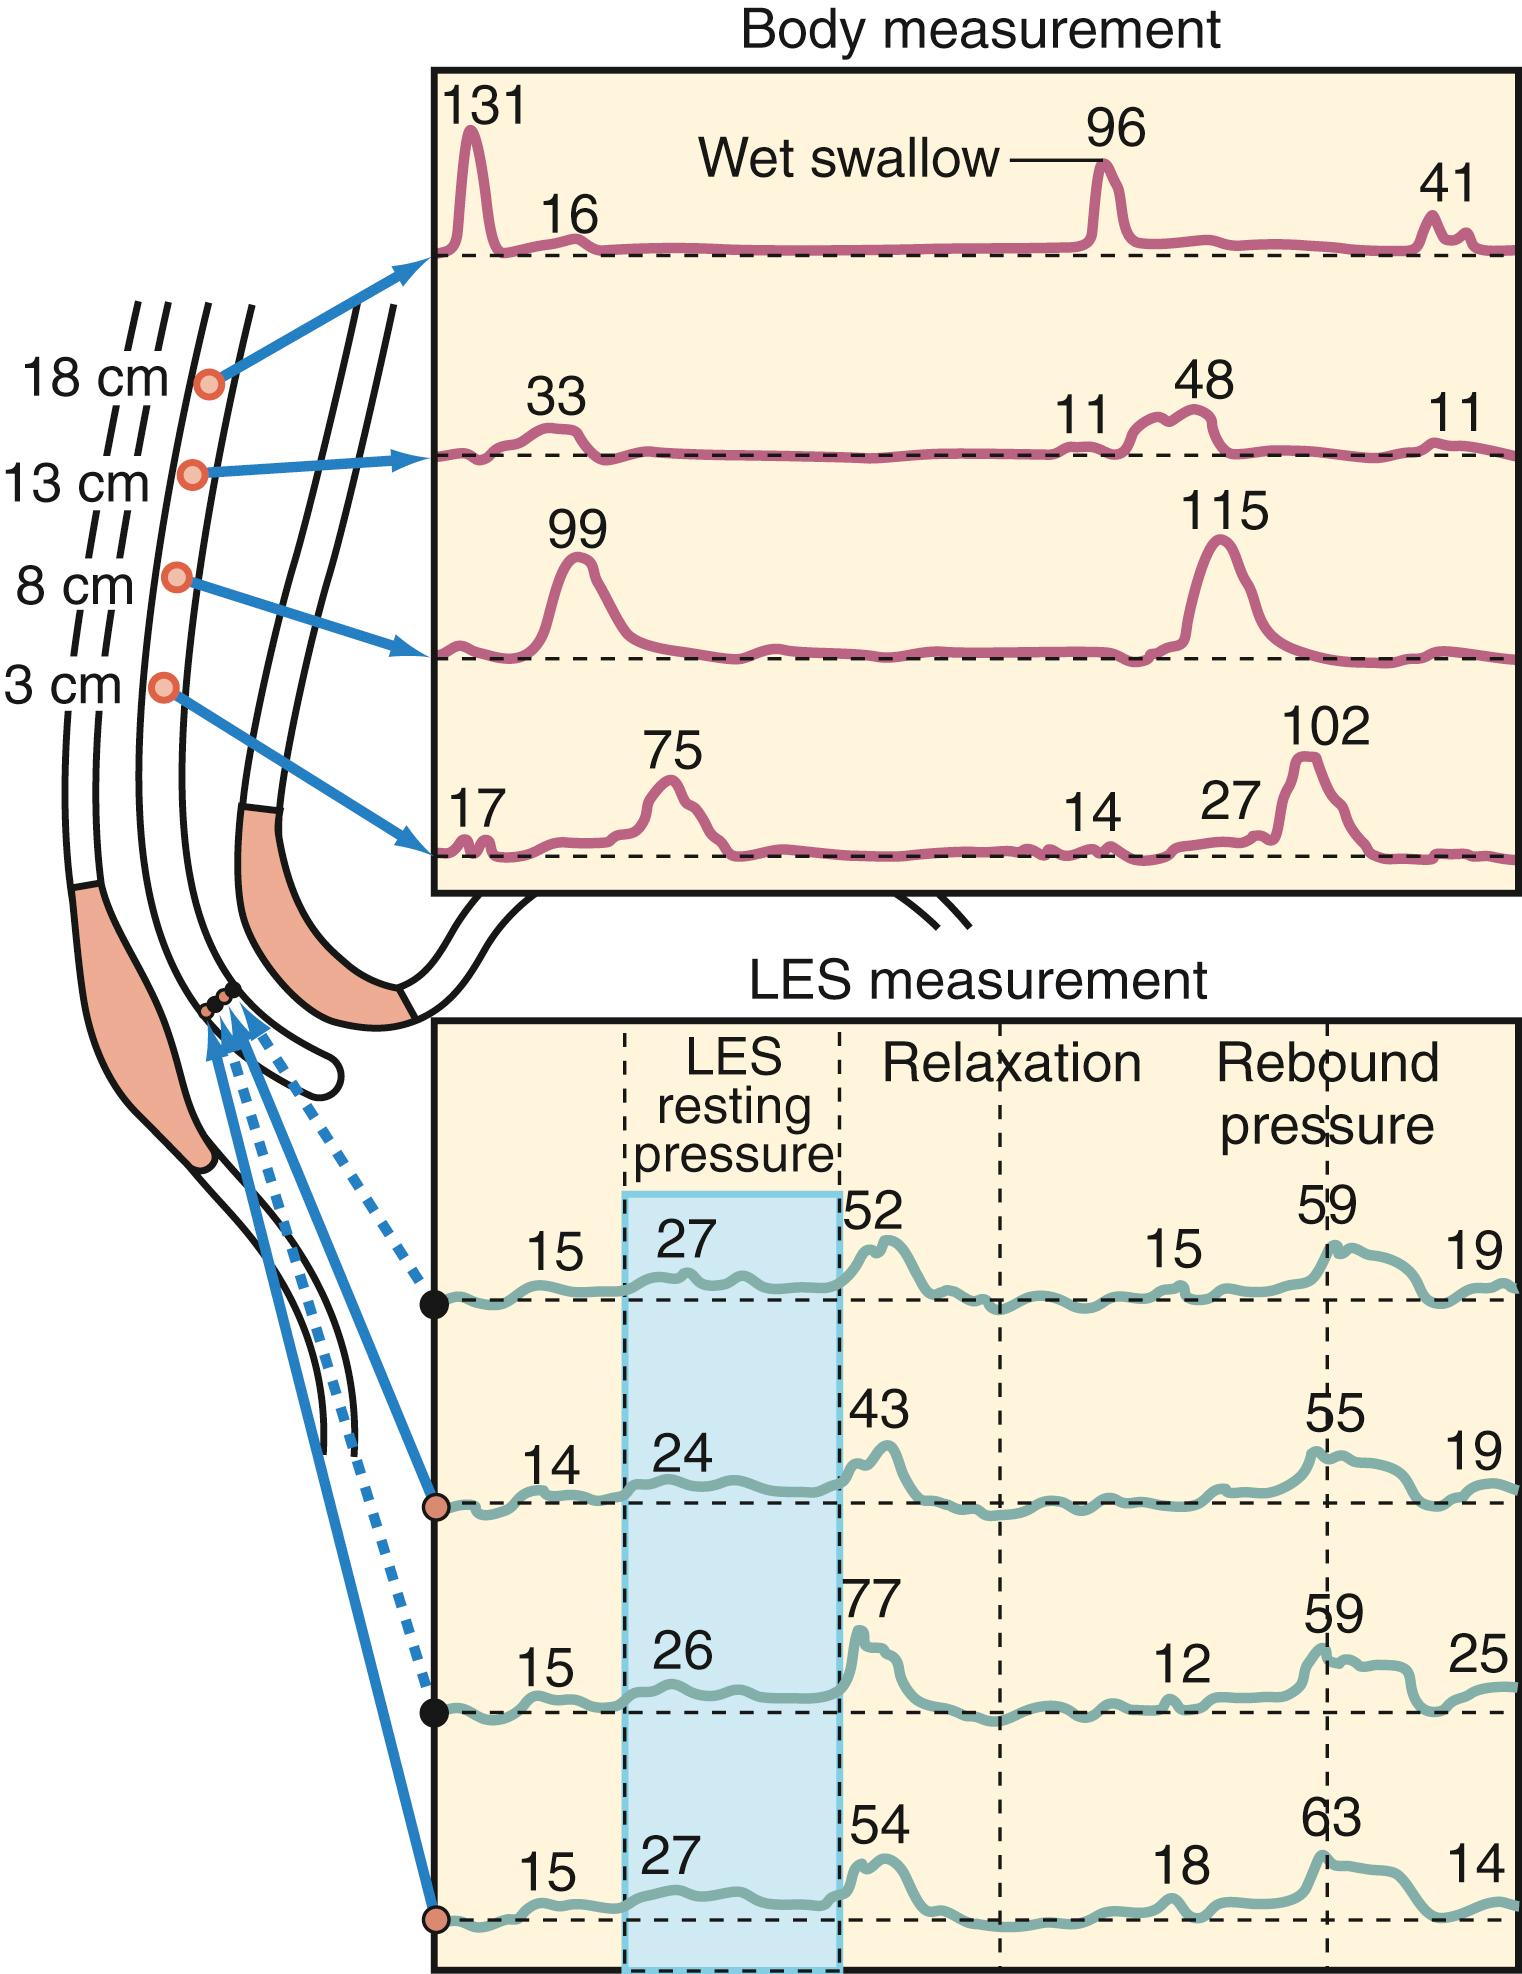 Fig. 43.5, Representative linear tracings from standard esophageal manometry. A wet swallow initiates both esophageal peristalsis and lower esophageal sphincter ( LES ) relaxation.